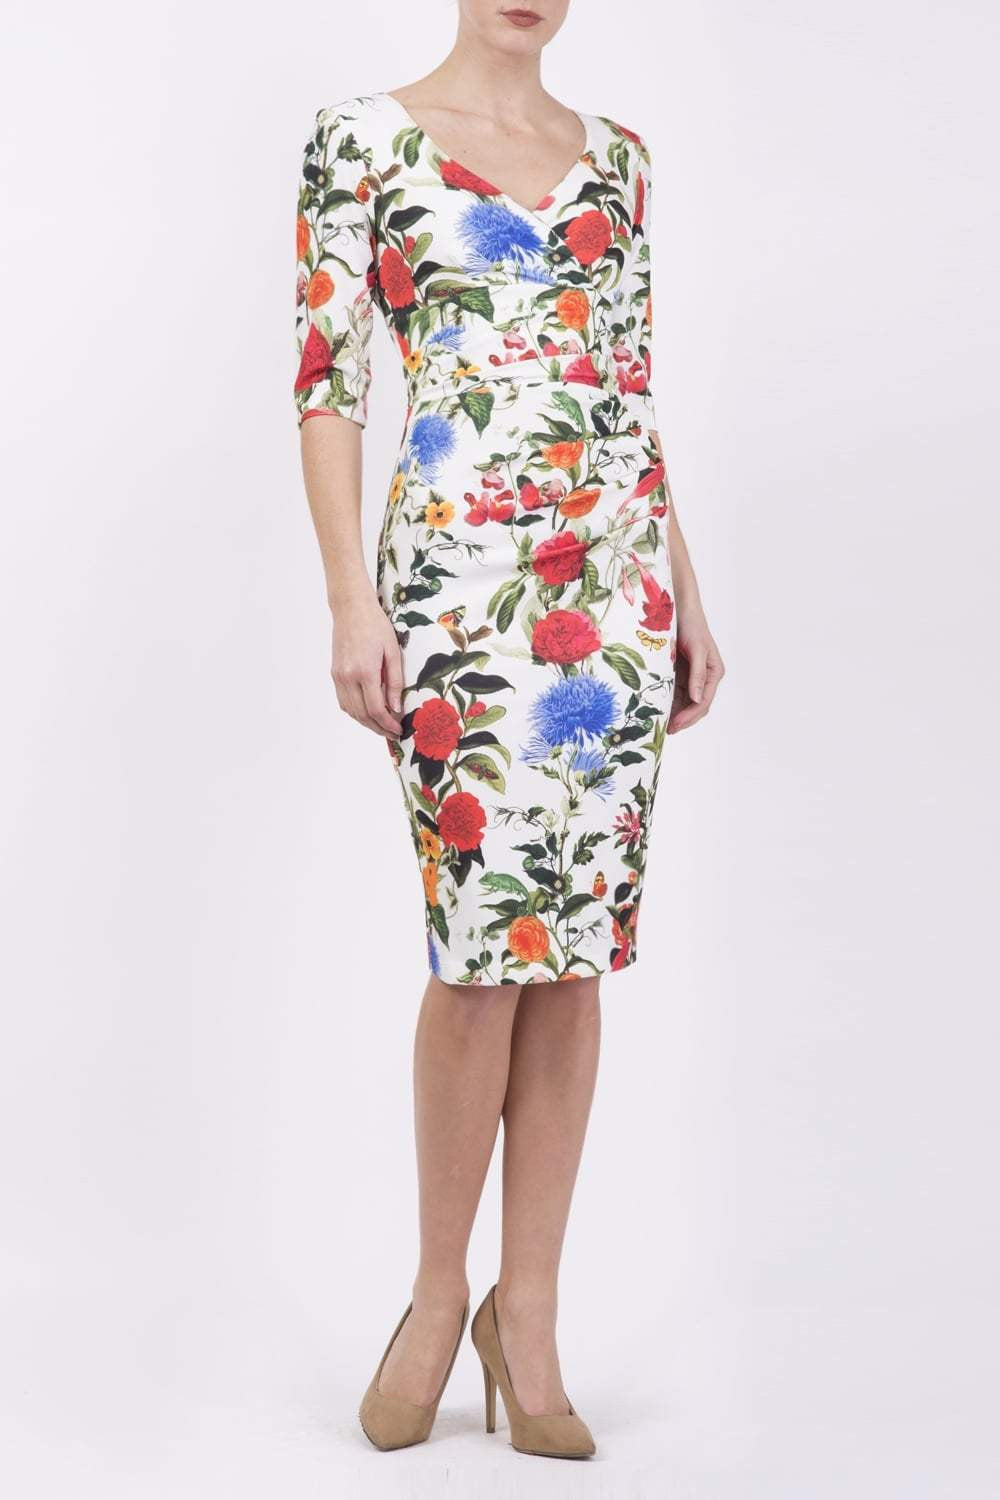 Model wearing the Diva Cynthia Floral Print dress with pleating across the front in Eden print front